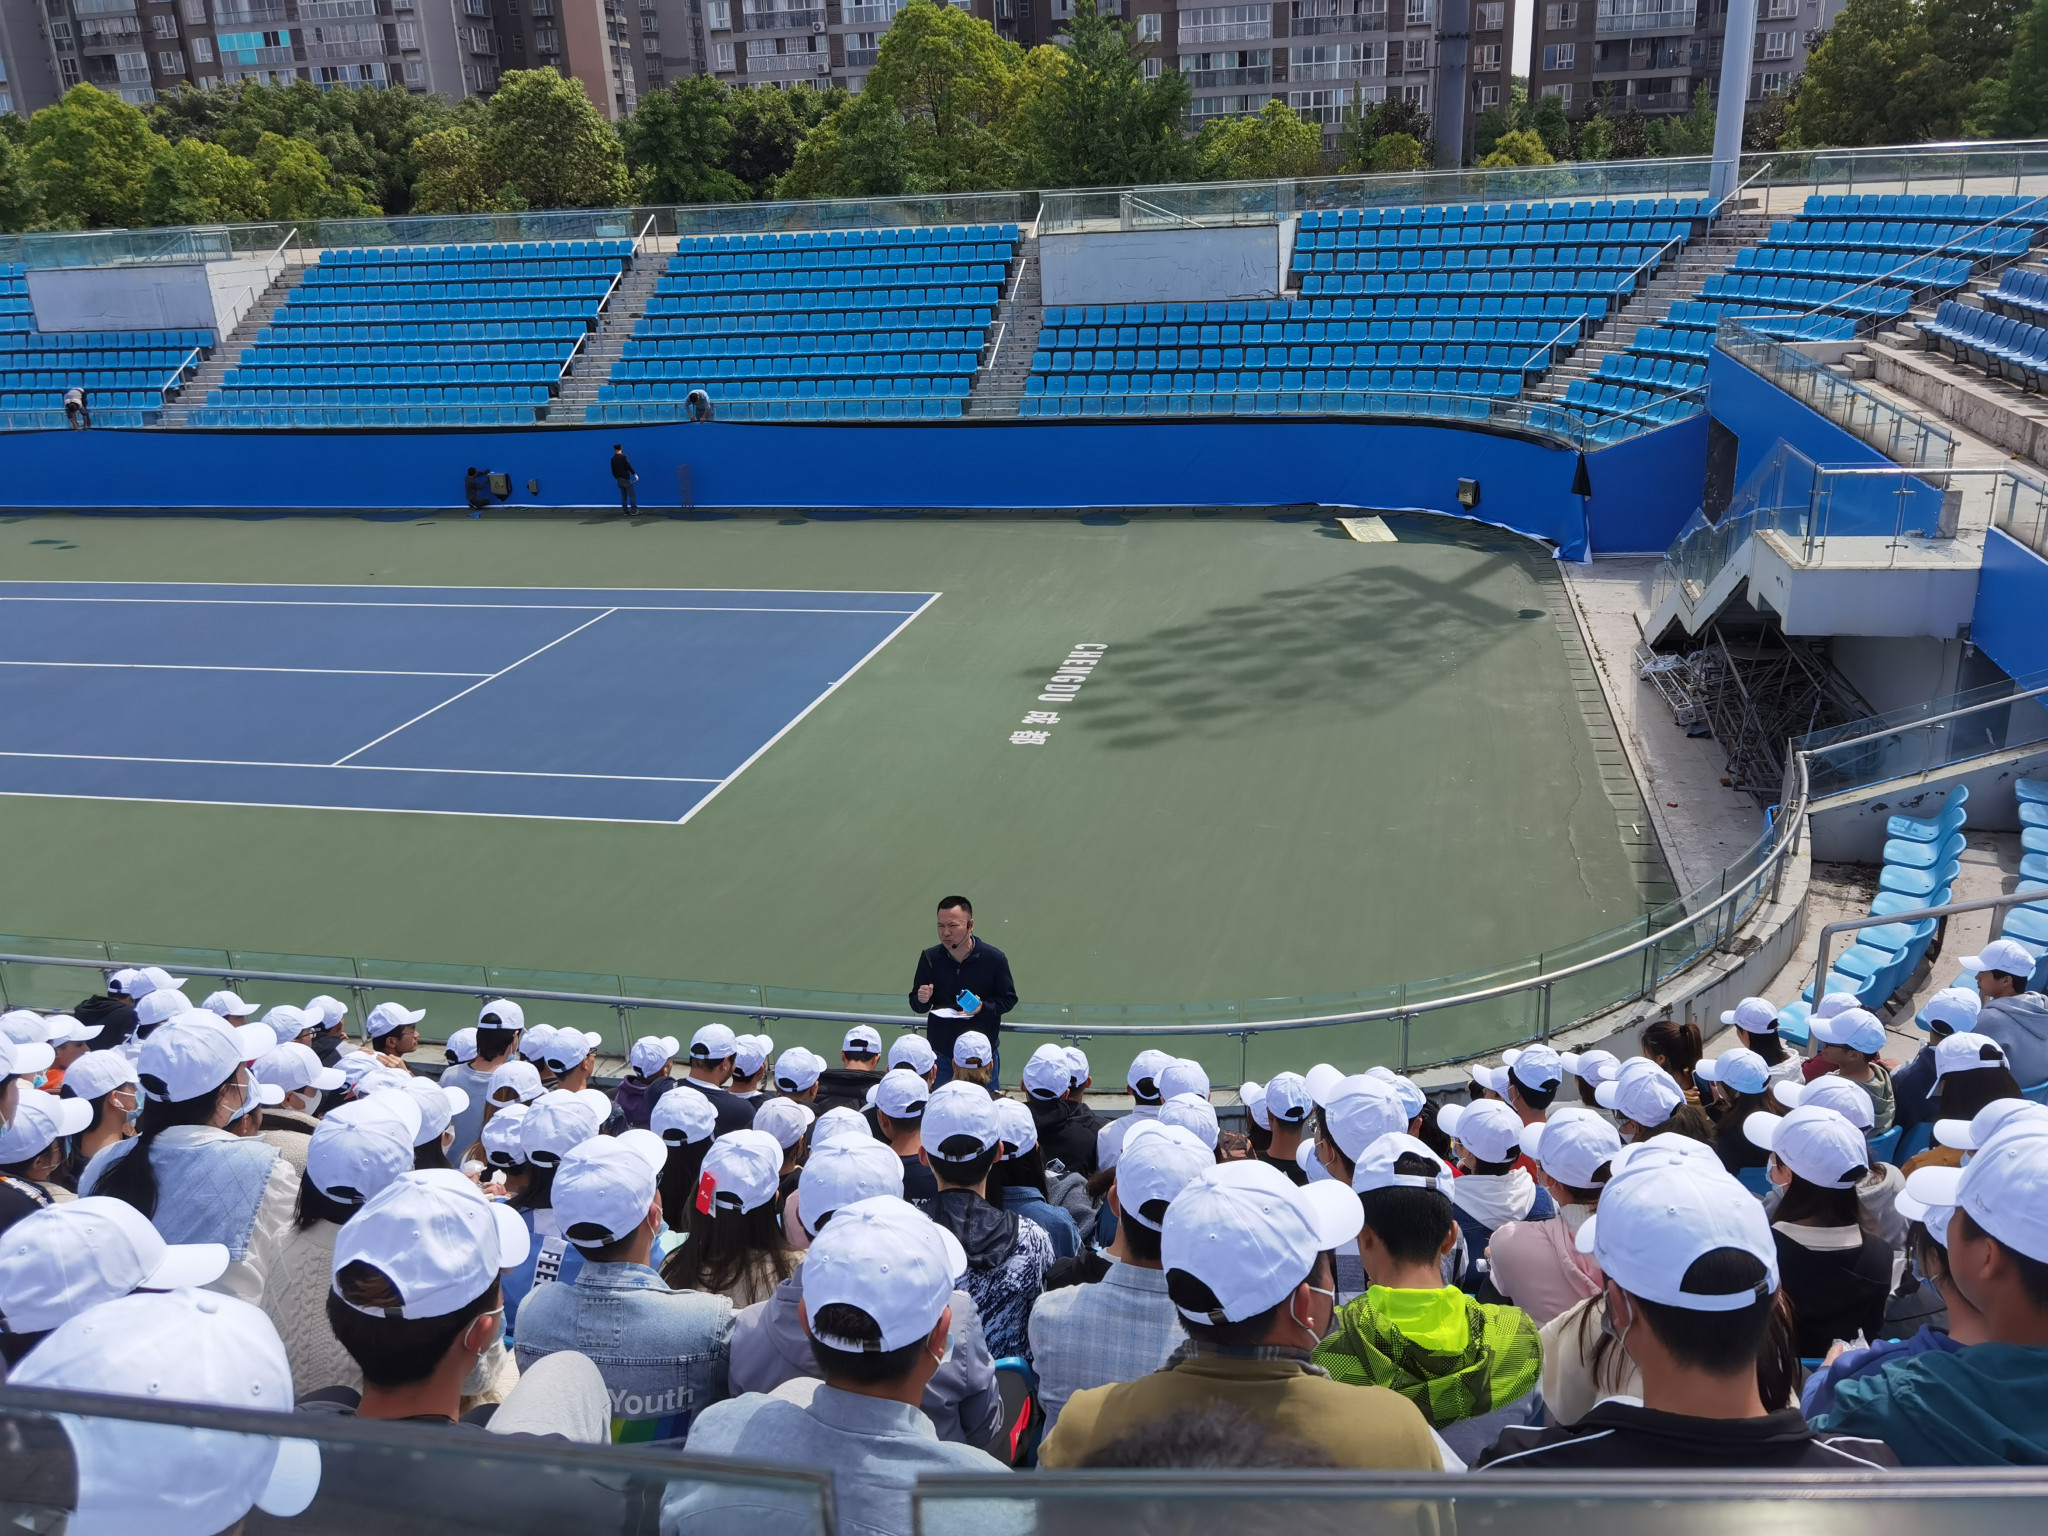 Chengdu 2021 volunteers appear for first time at local tennis event